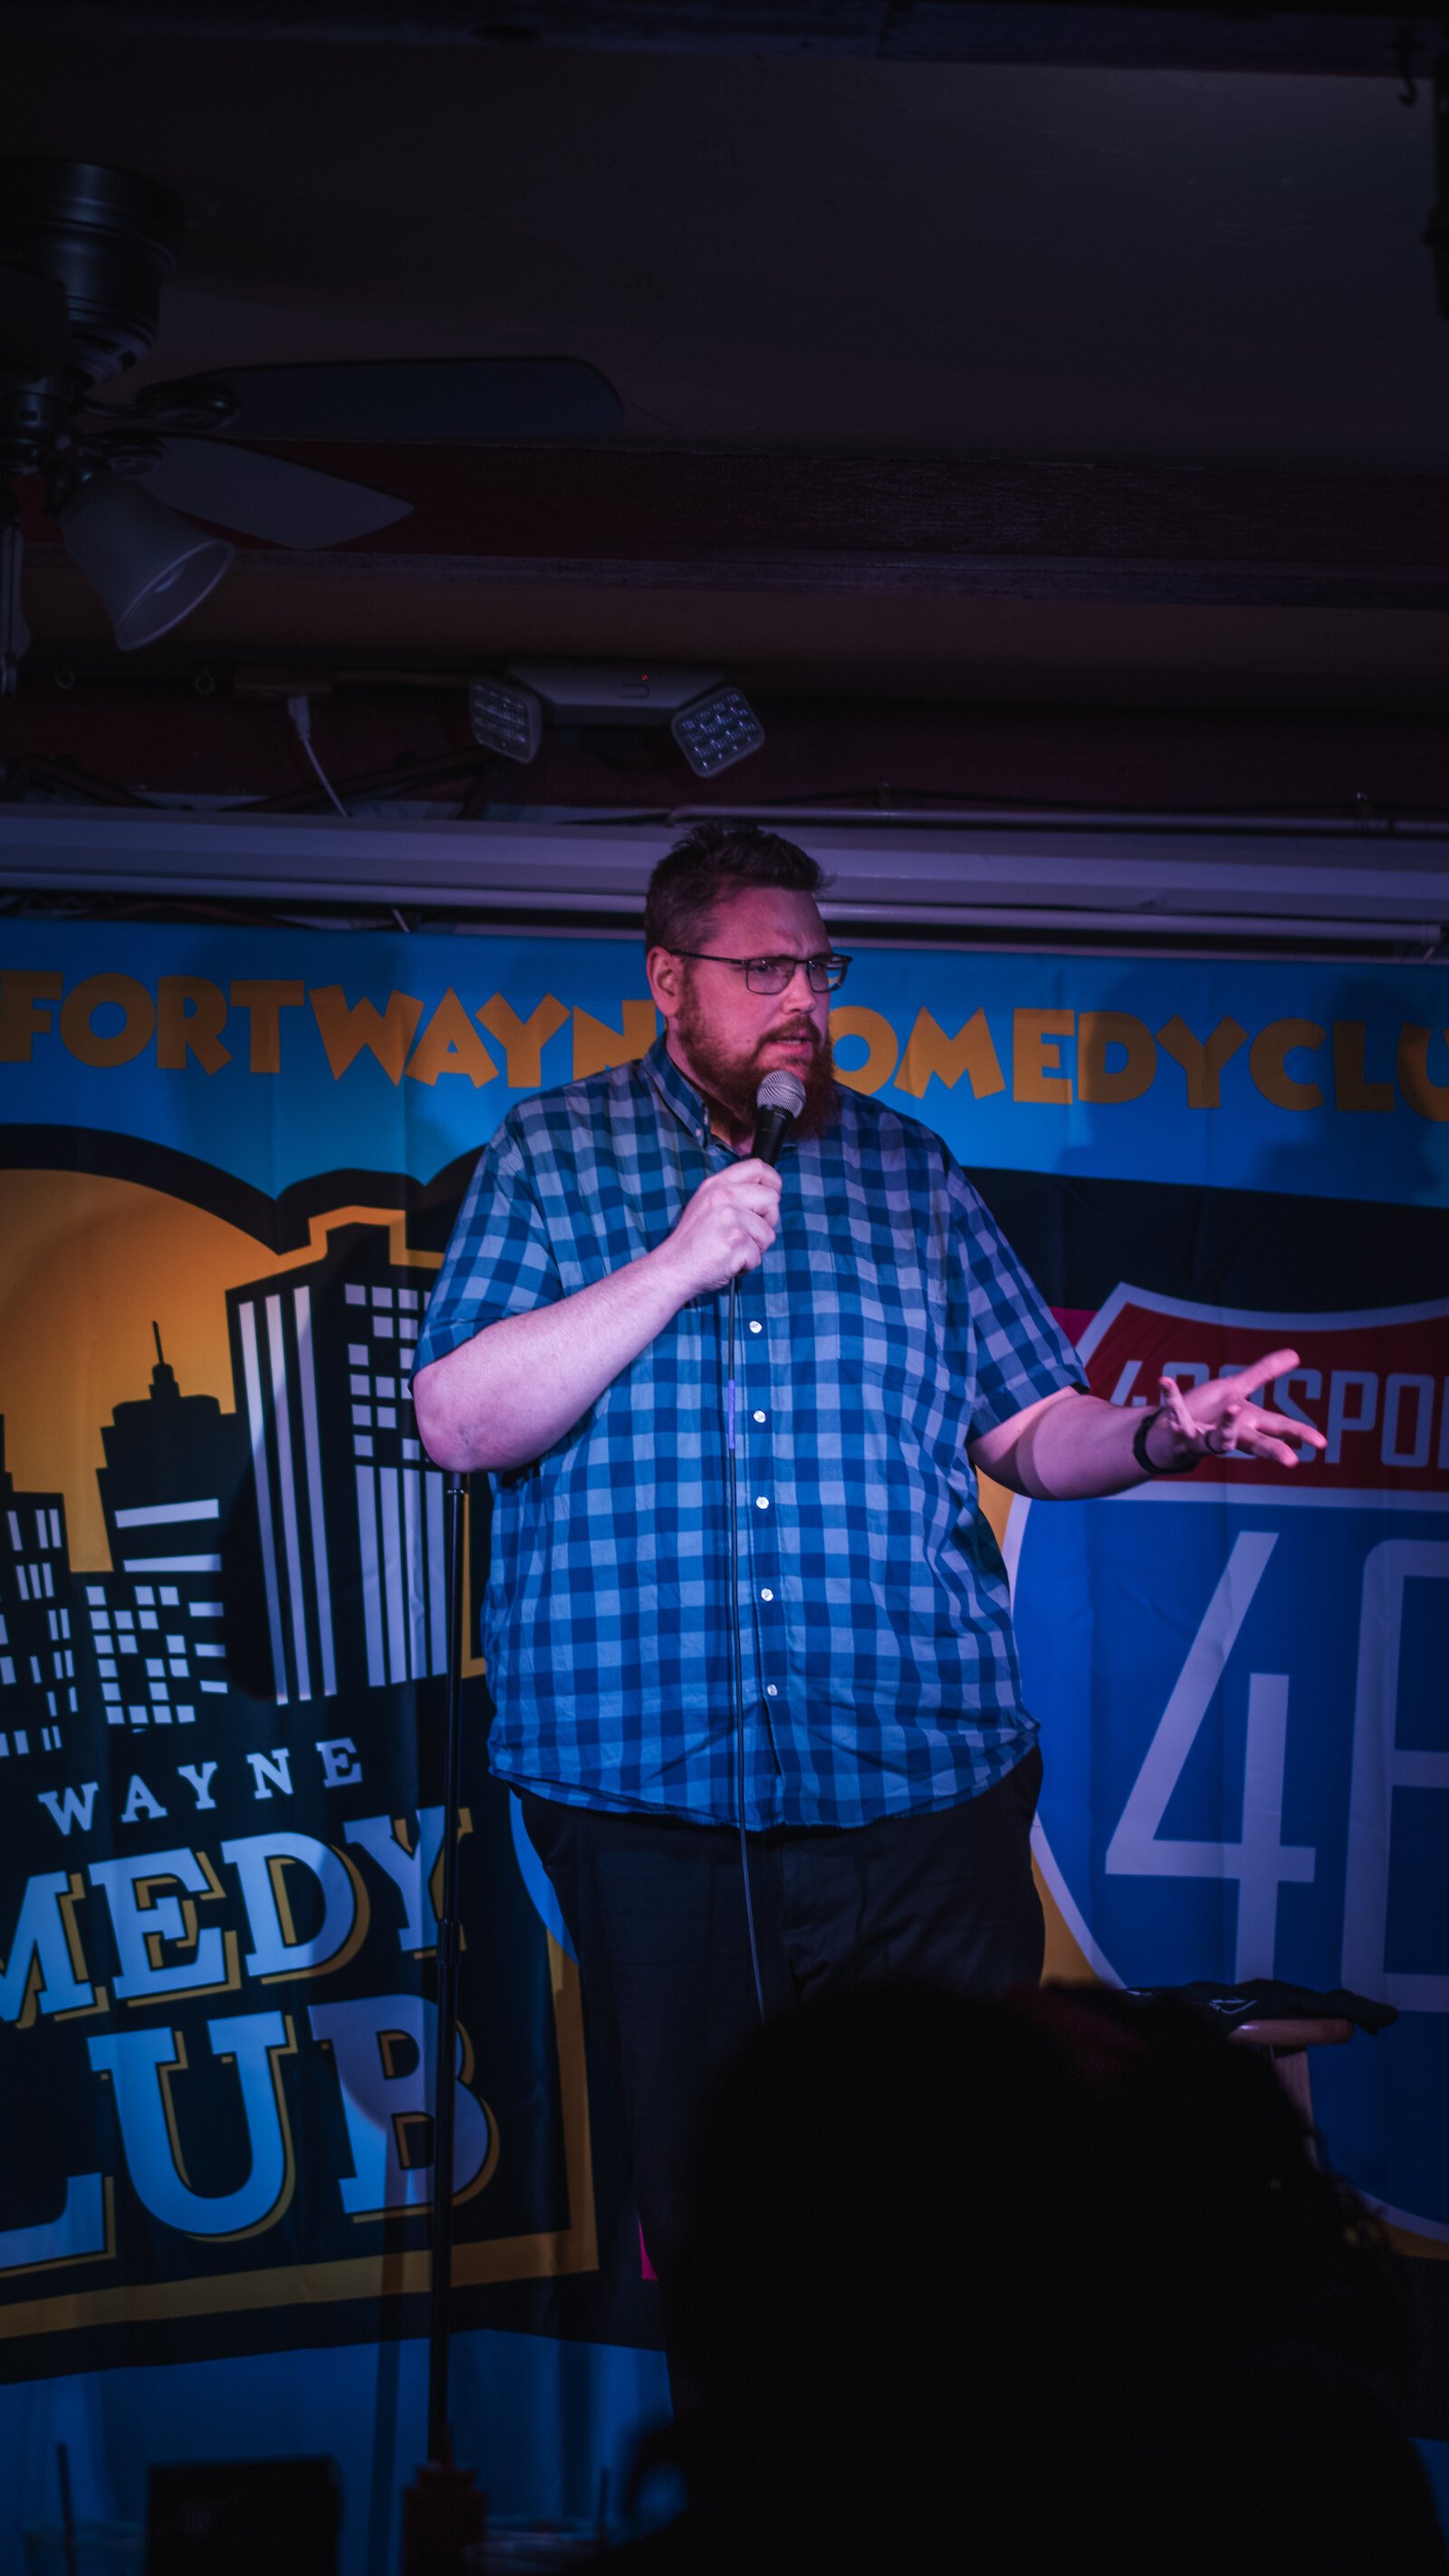 Jake Hovis at The Fort Wayne Comedy Club.